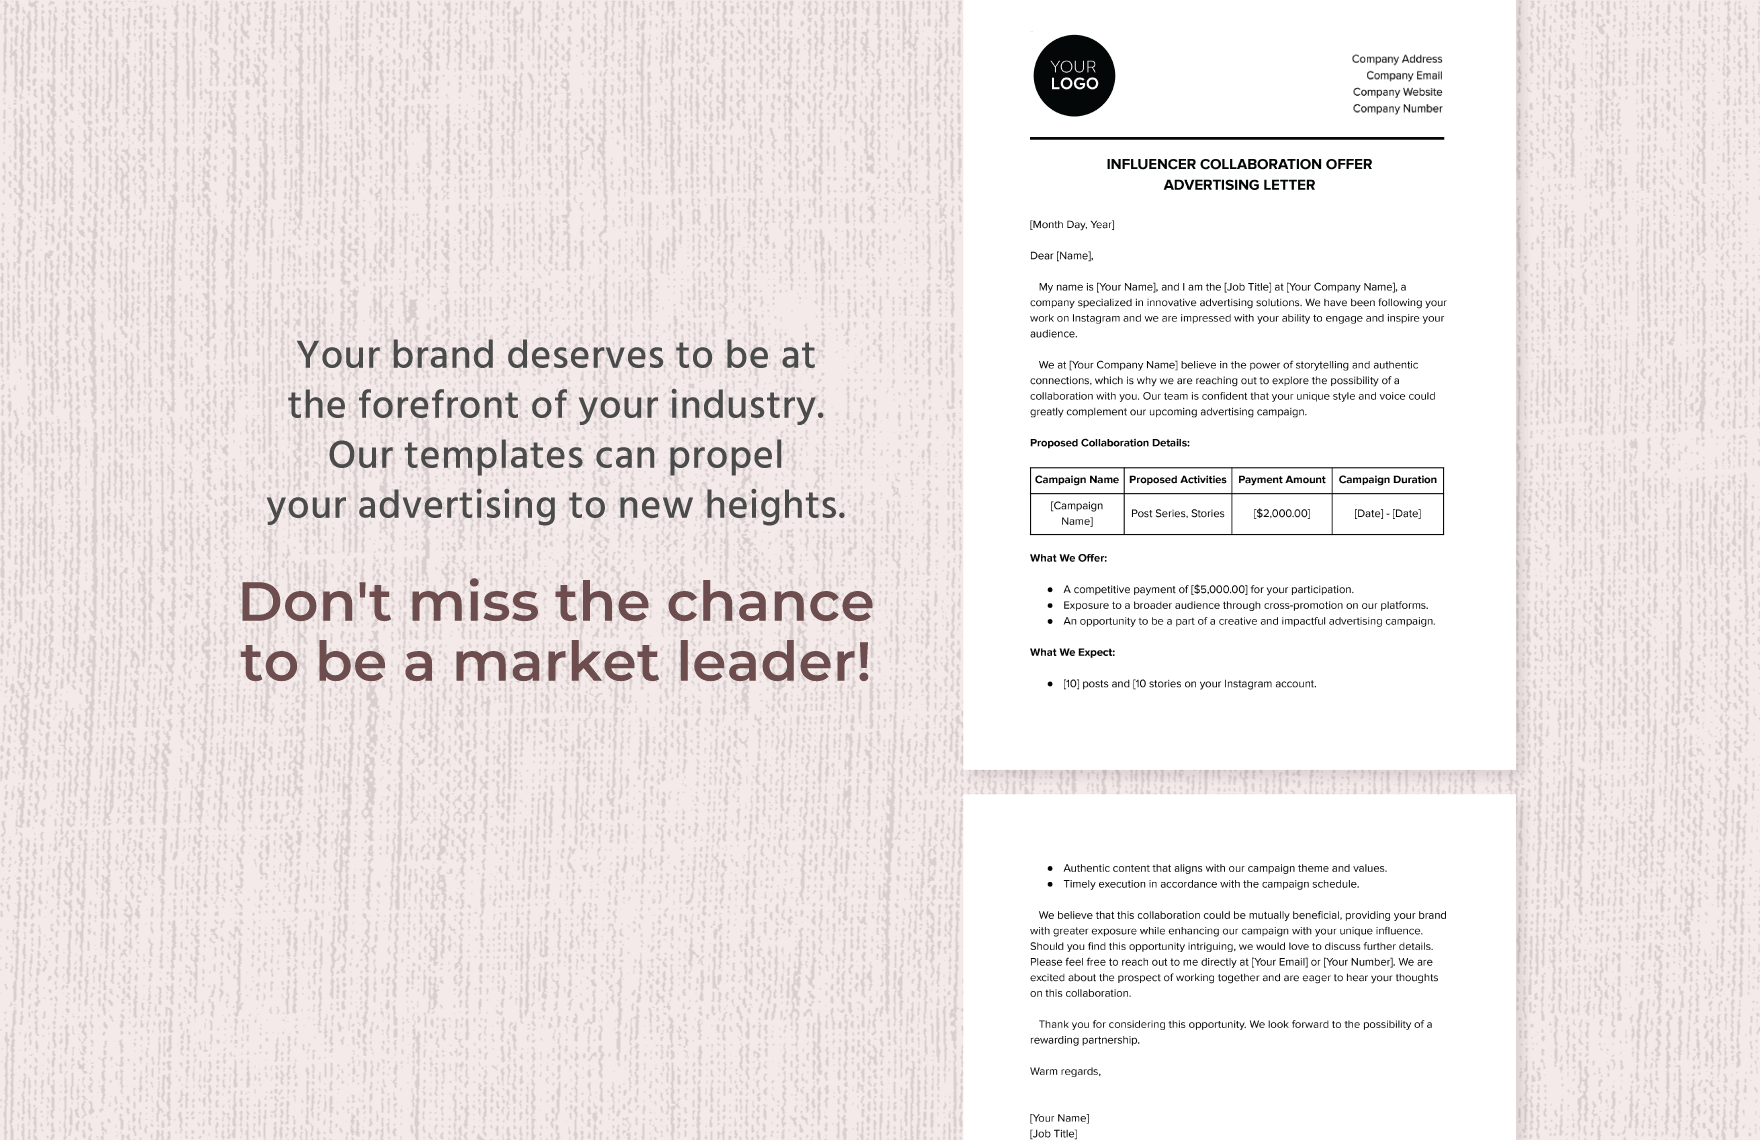 Influencer Collaboration Offer Advertising Letter Template